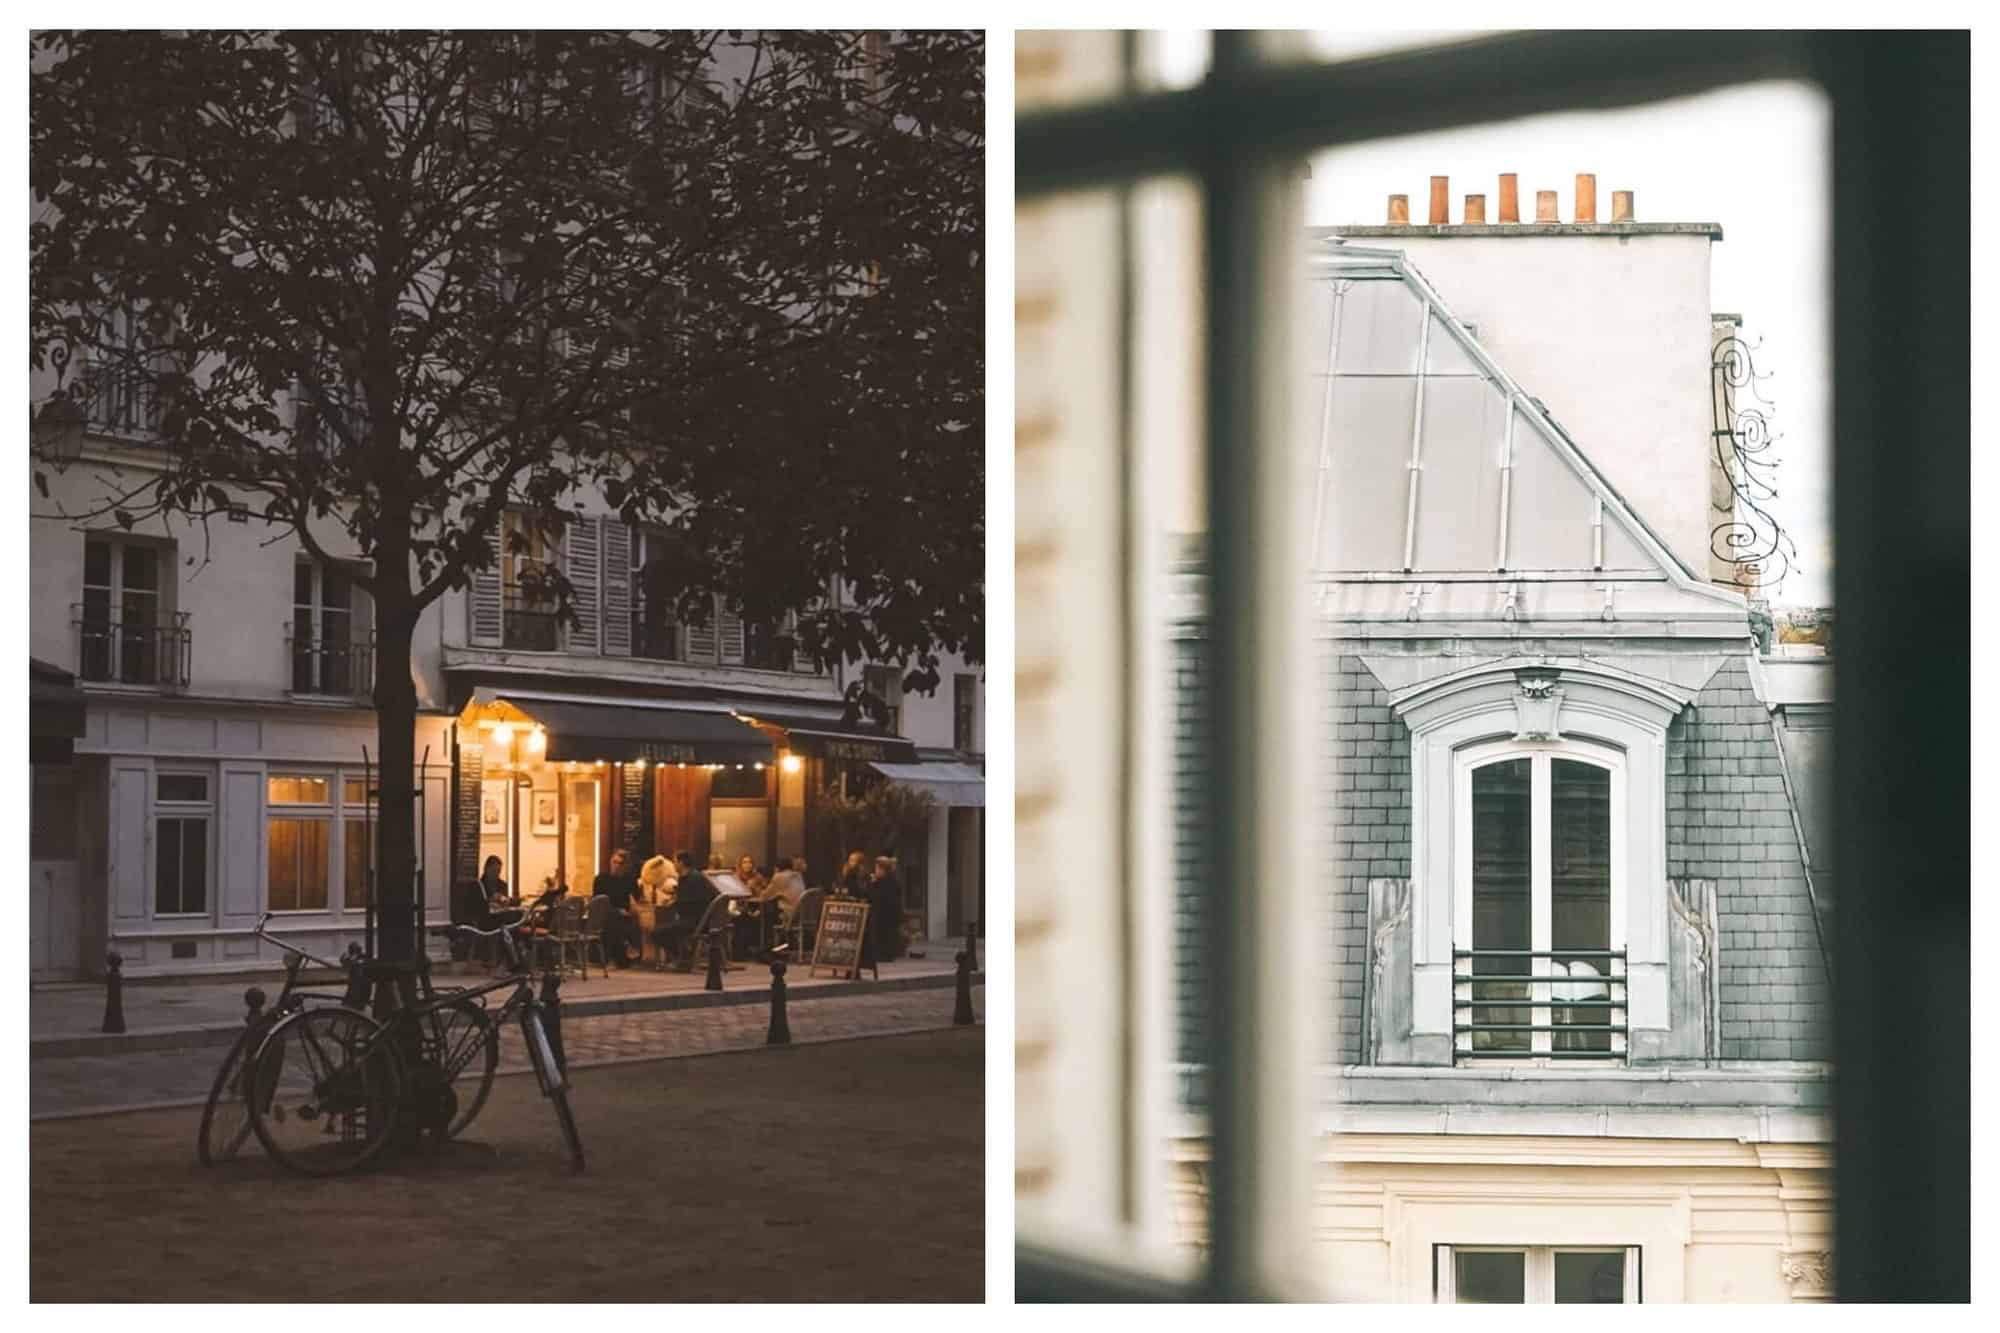 Left: a Parisian cafe at night. There are a few people sitting outside under the awning with lights on it. The rest of the buildings are dark, but there are some trees with bikes leaning against them that are visible. Right: The view of a window in Paris through another window. The panes of the window that is being looking through are visible and the window that can be seen is white with a bit of iron work on it.